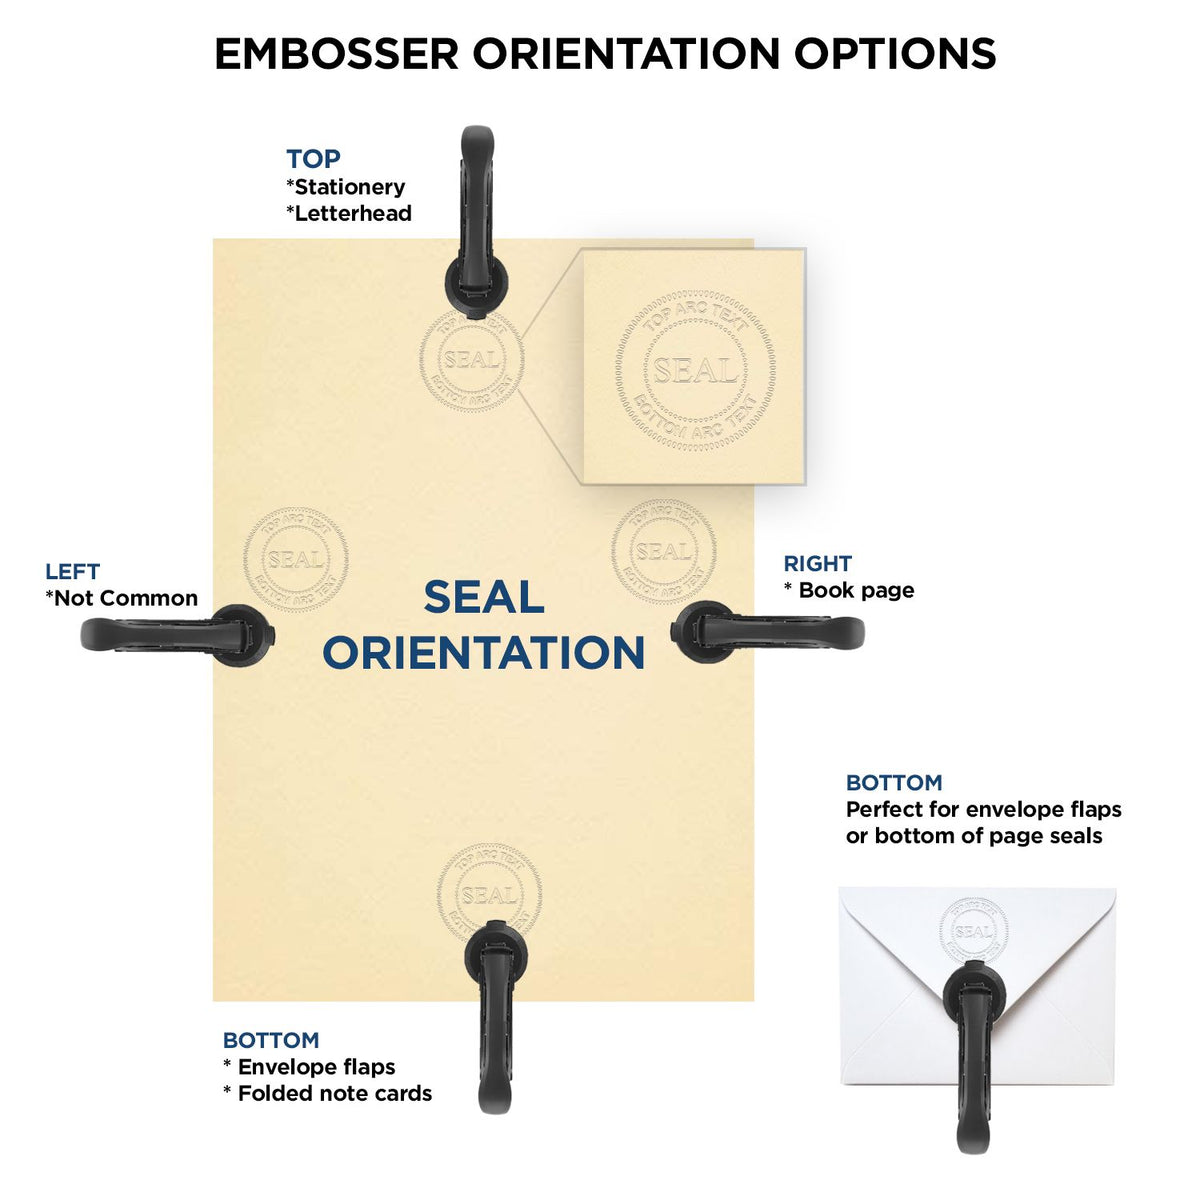 An infographic for the Nebraska Engineer Desk Seal showing embosser orientation, this is showing examples of a top, bottom, right and left insert.